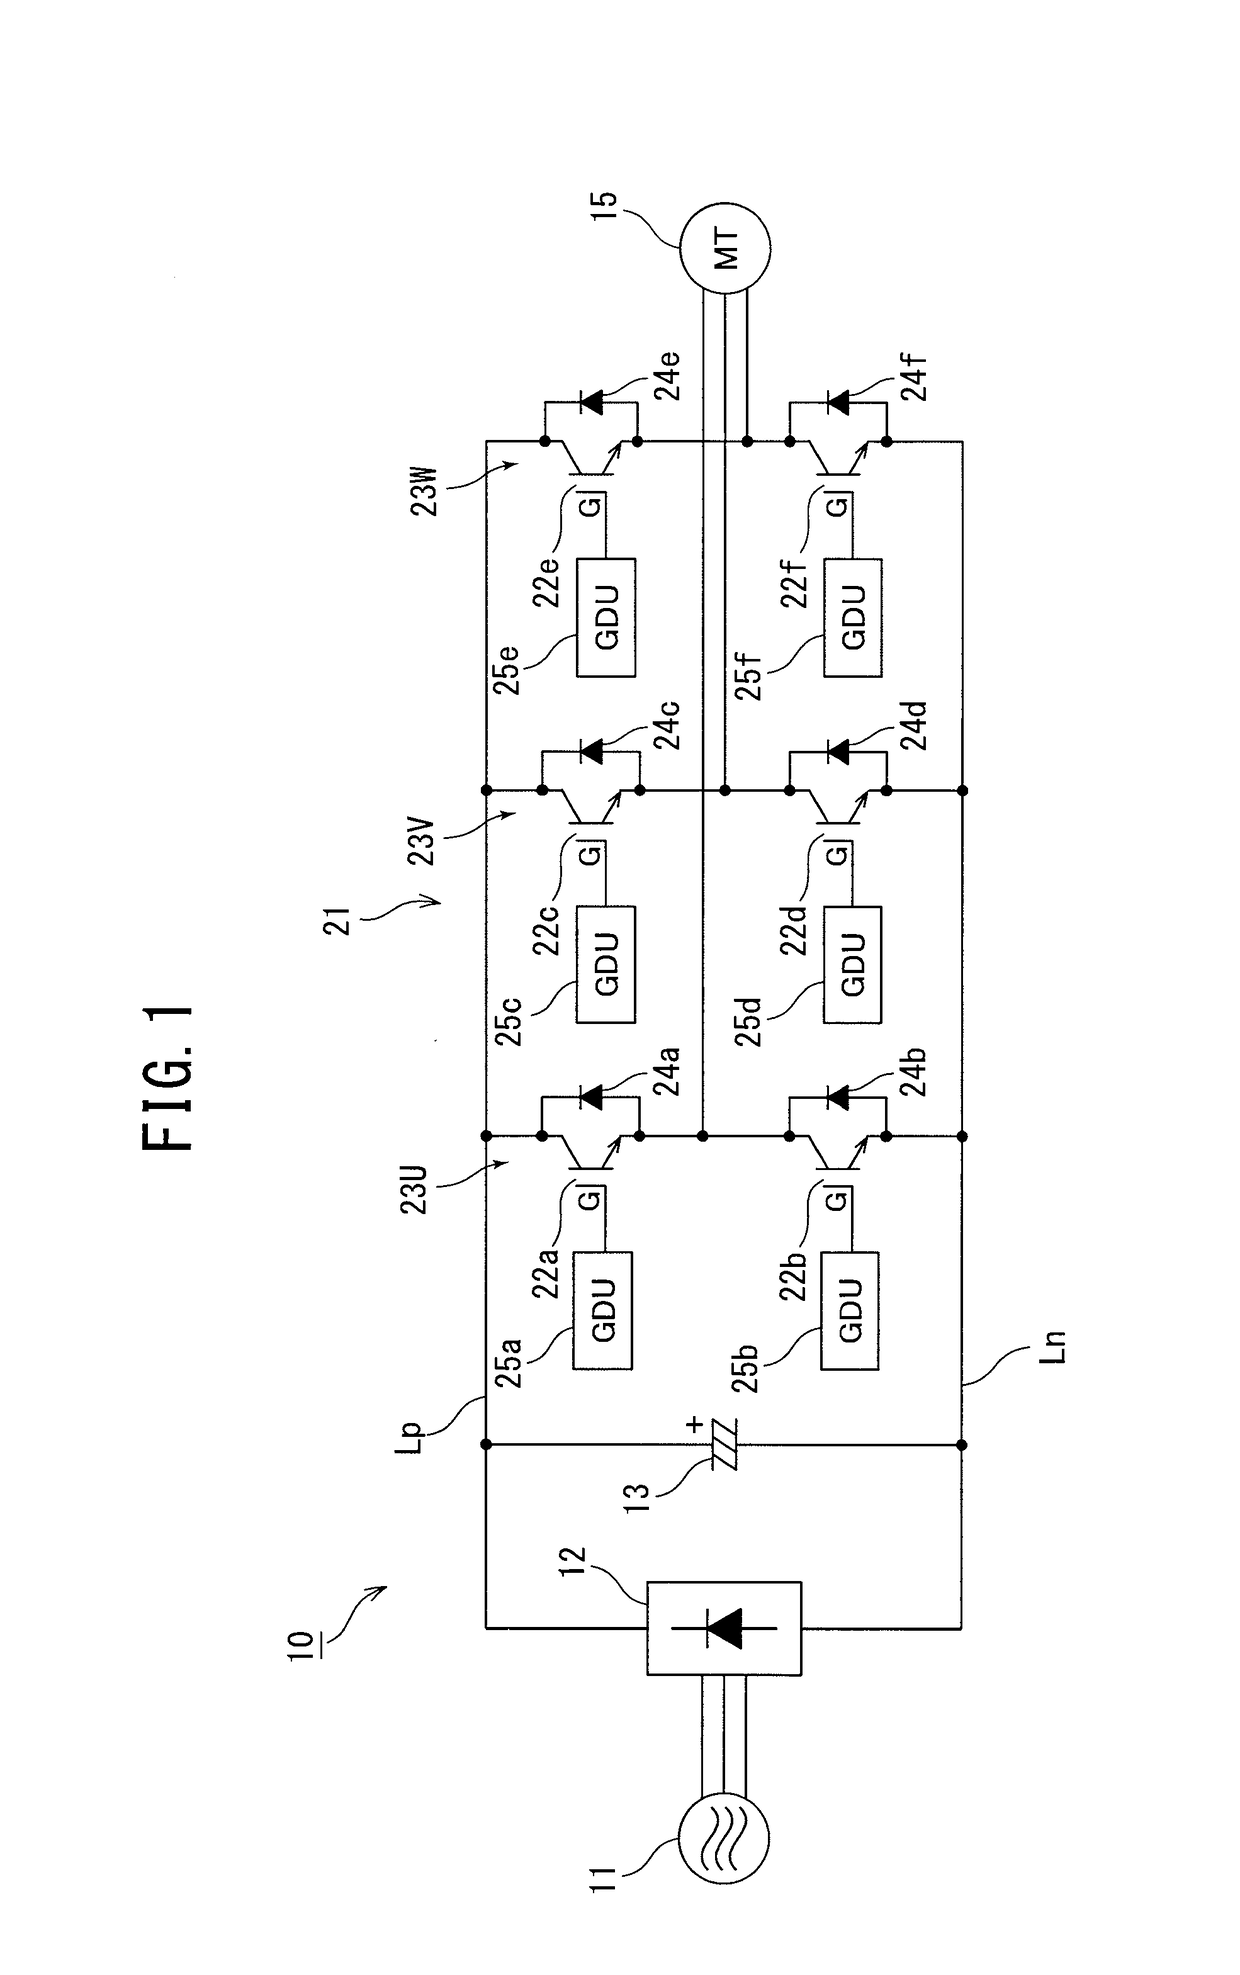 Drive unit of semiconductor element